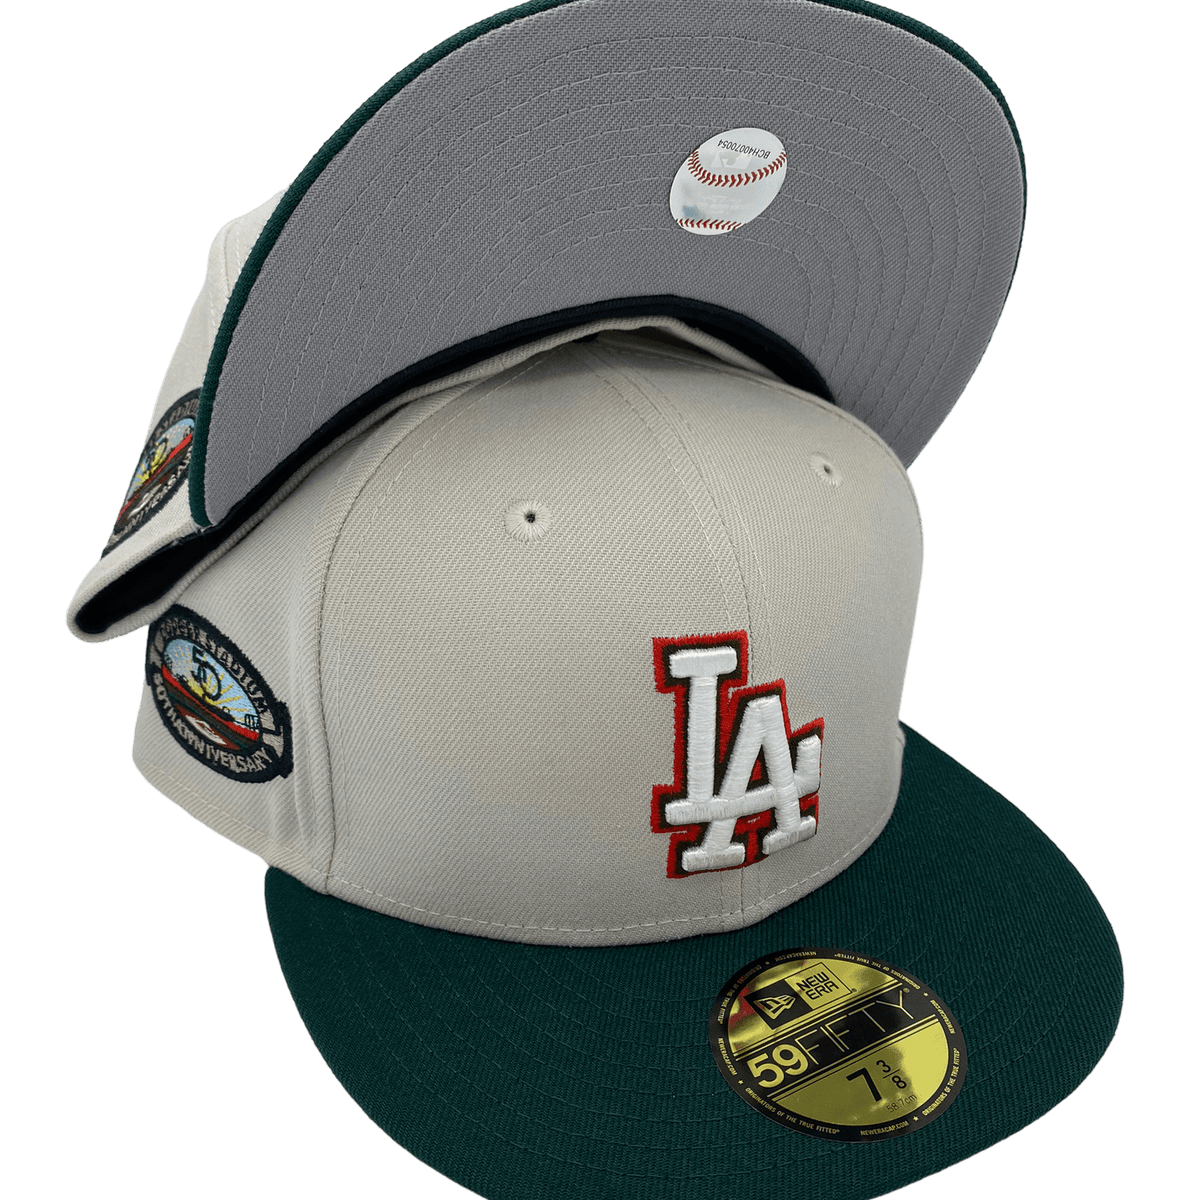 Men's Los Angeles Dodgers New Era Green White Logo 59FIFTY Fitted Hat